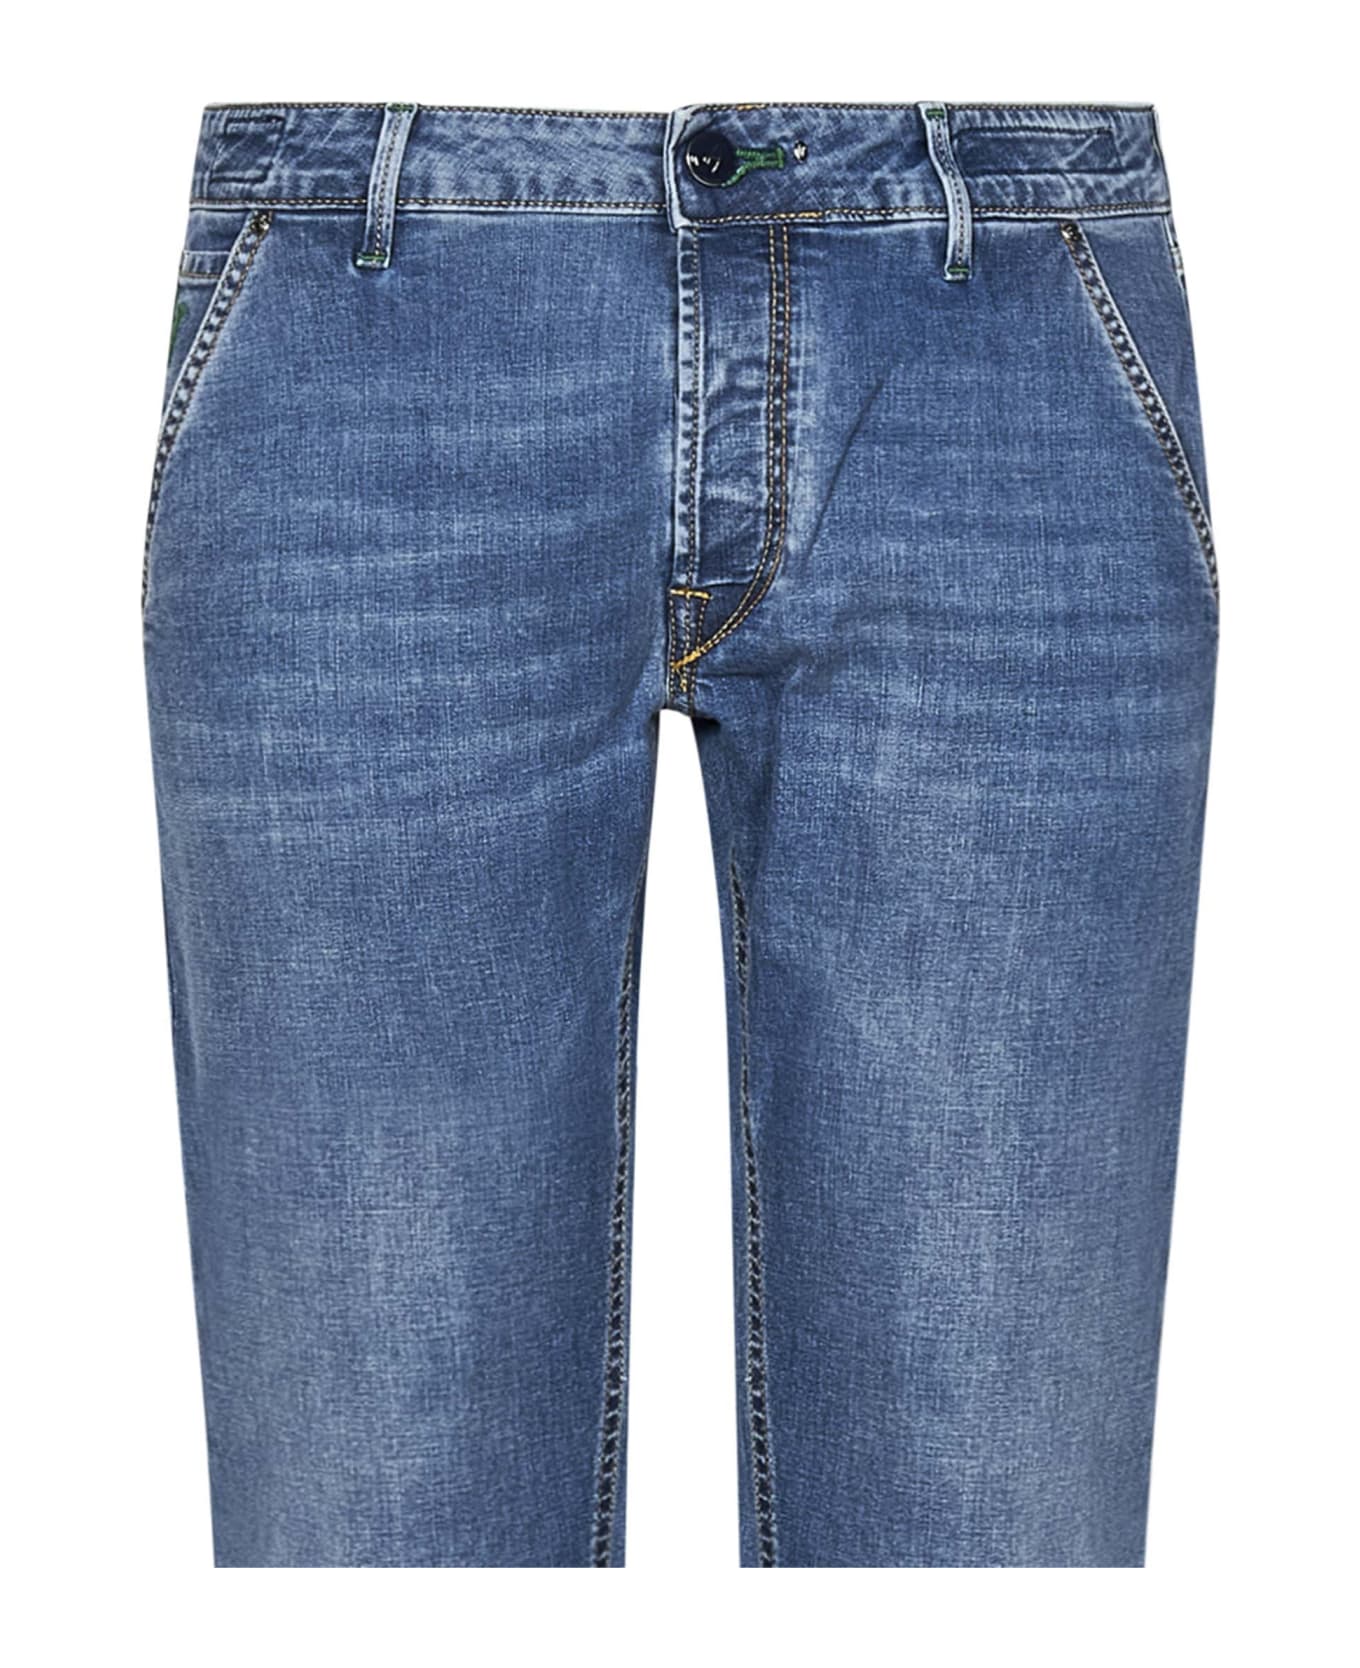 Hand Picked Handpicked Parma Jeans - Blue